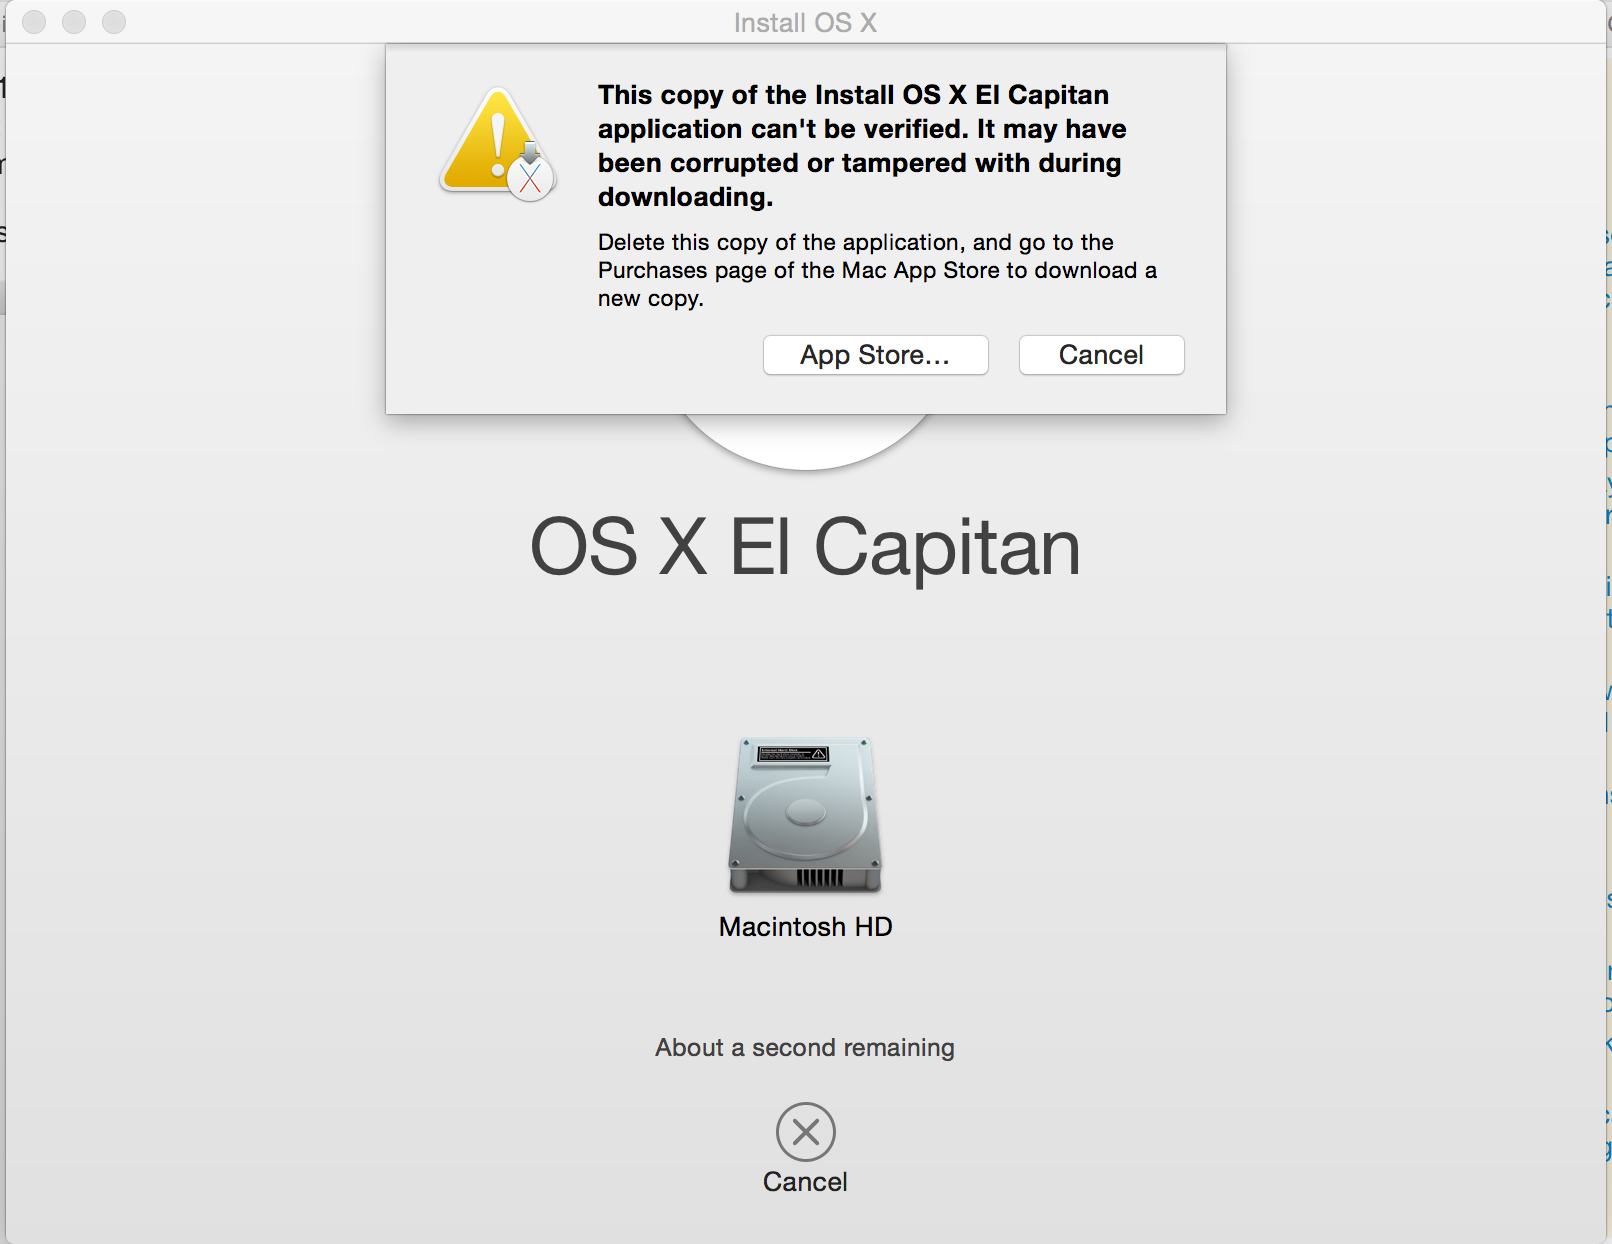 How Much Ram Do You Need For Os X El Capitan